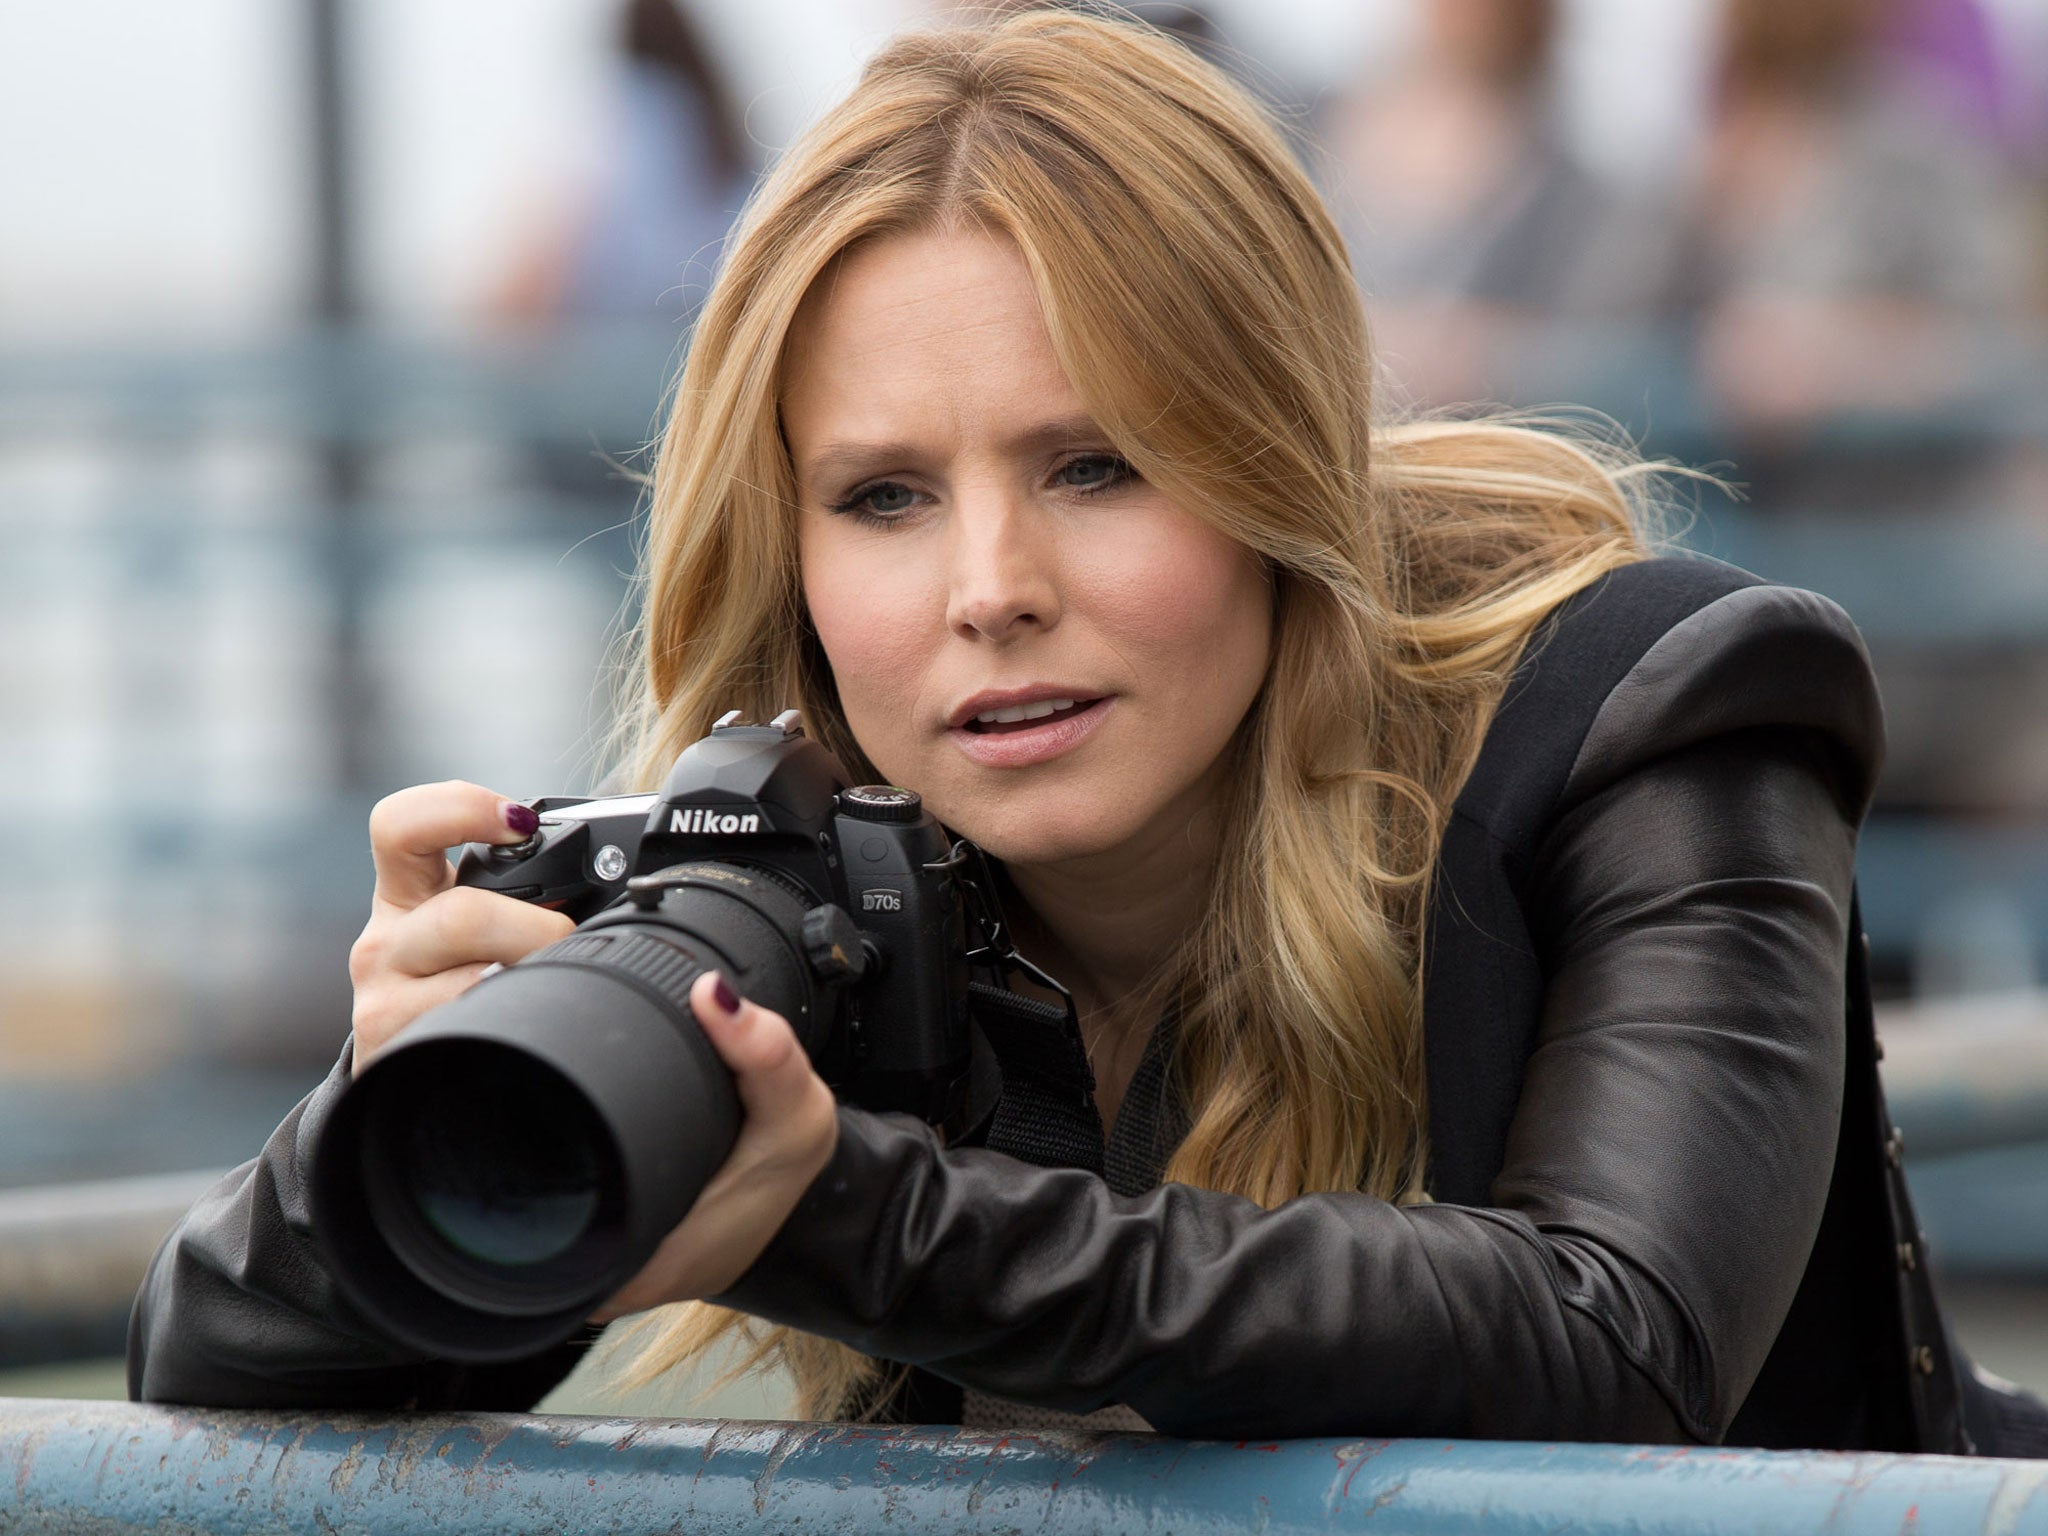 Kristen Bell in the Warner film of the same title, which picks up the story nine years on